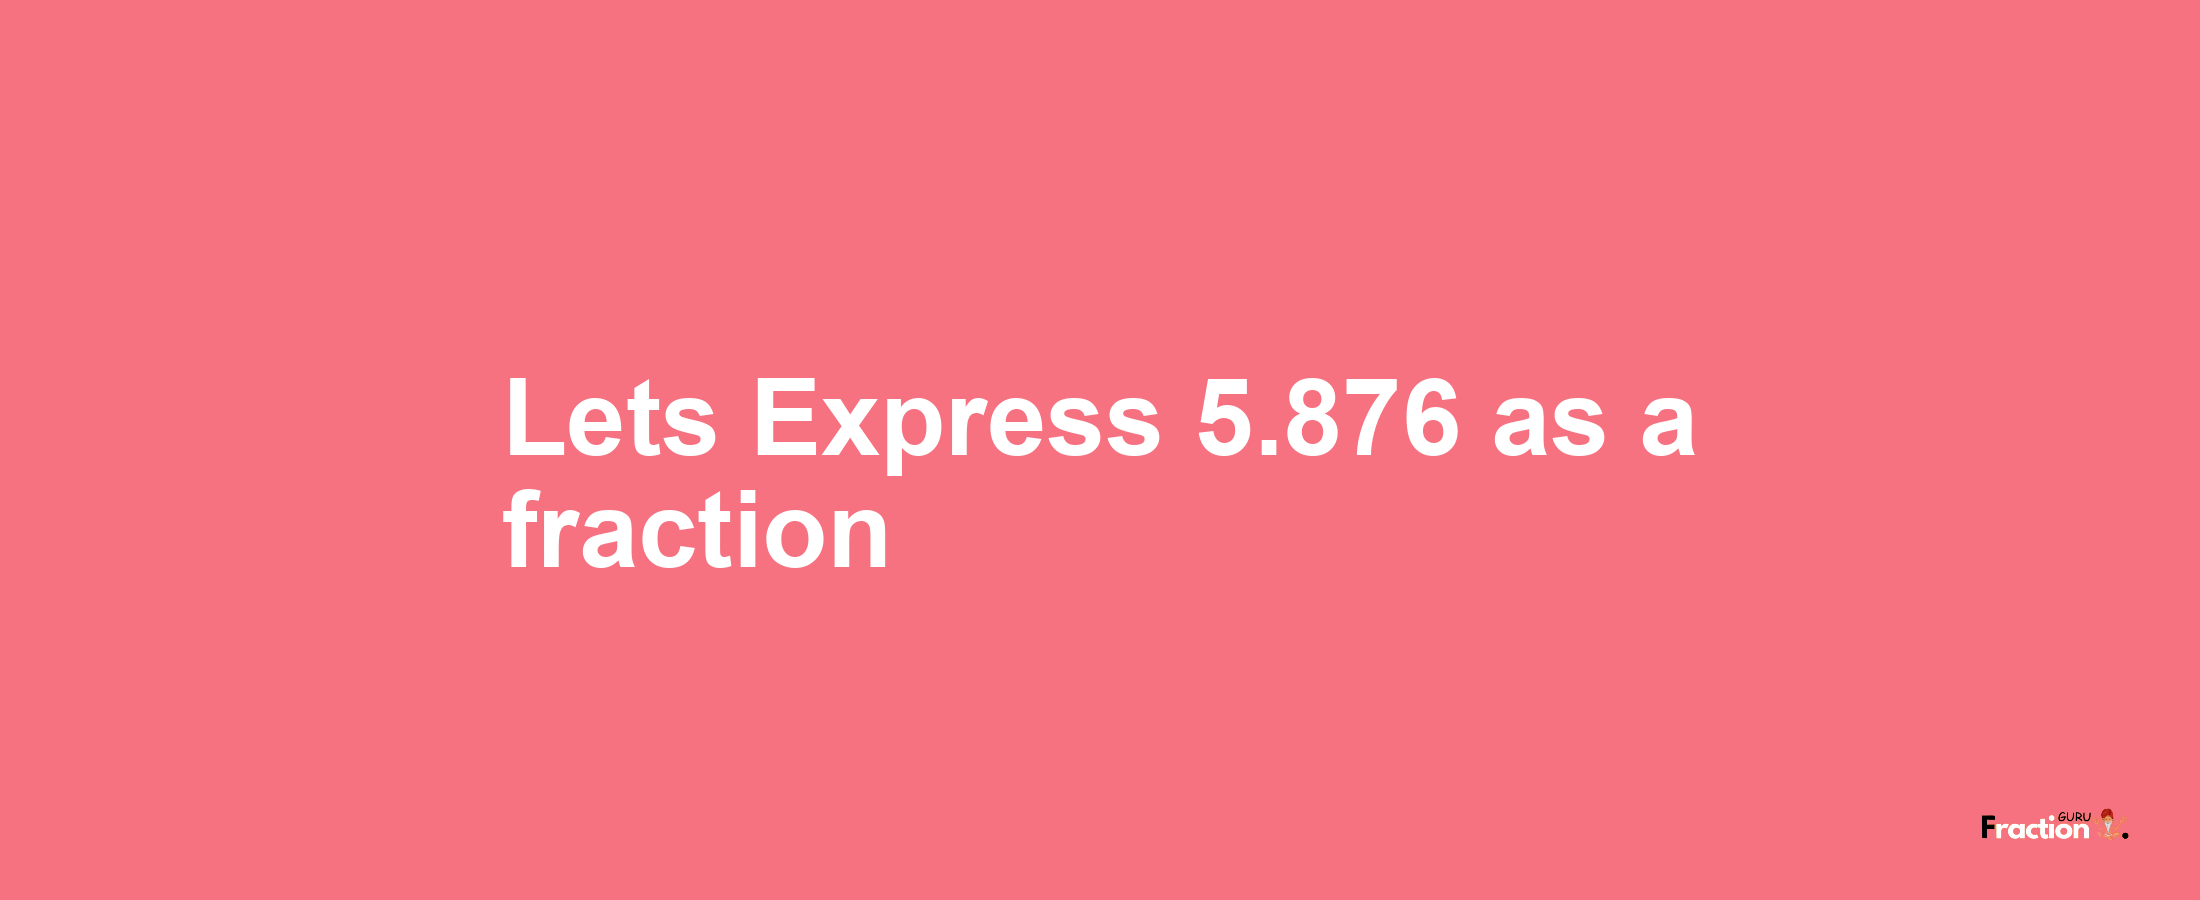 Lets Express 5.876 as afraction